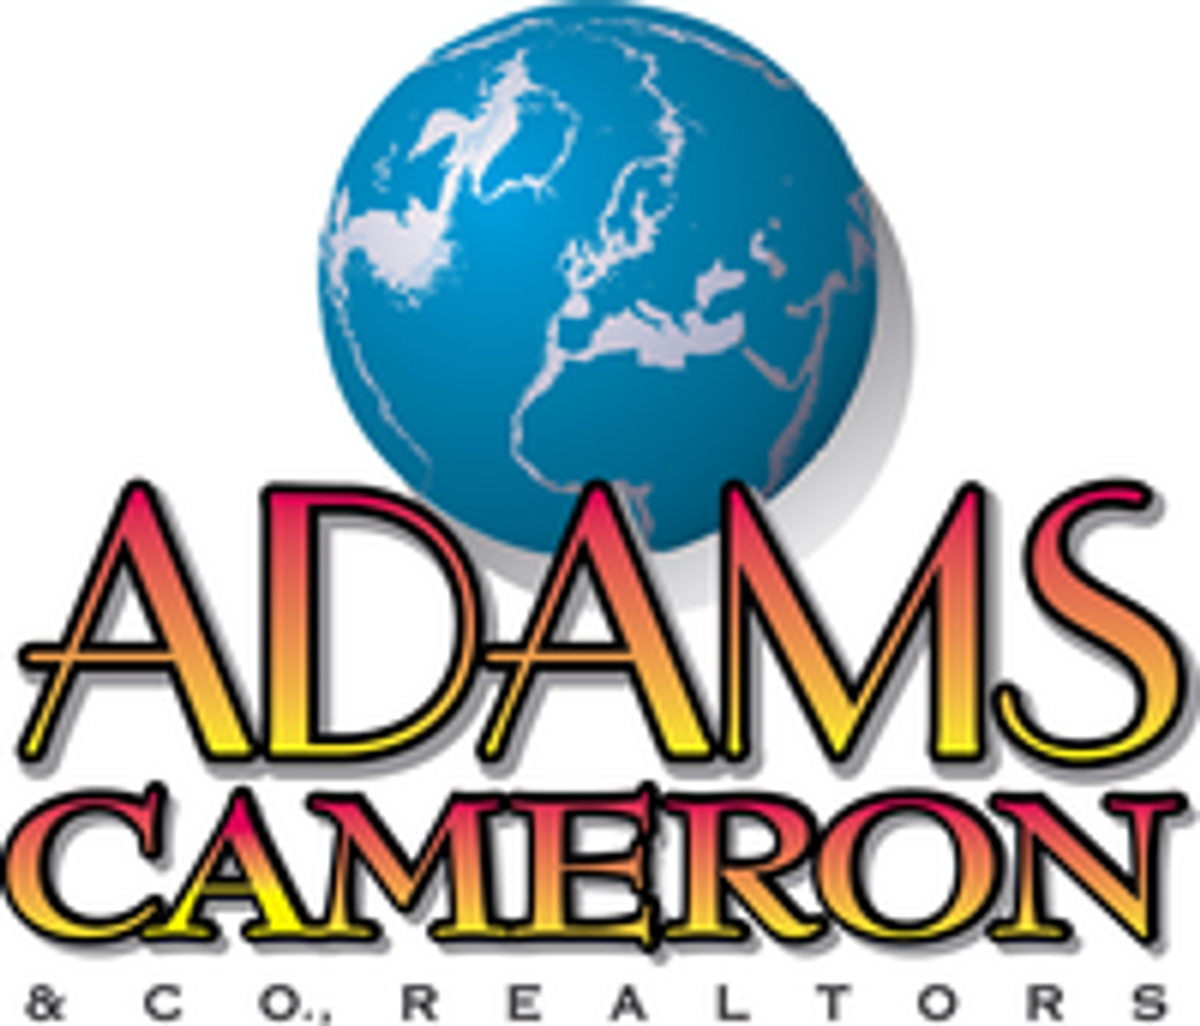 Photo for Dustin Breazeale, Listing Agent at Adams, Cameron & Co., Realtors